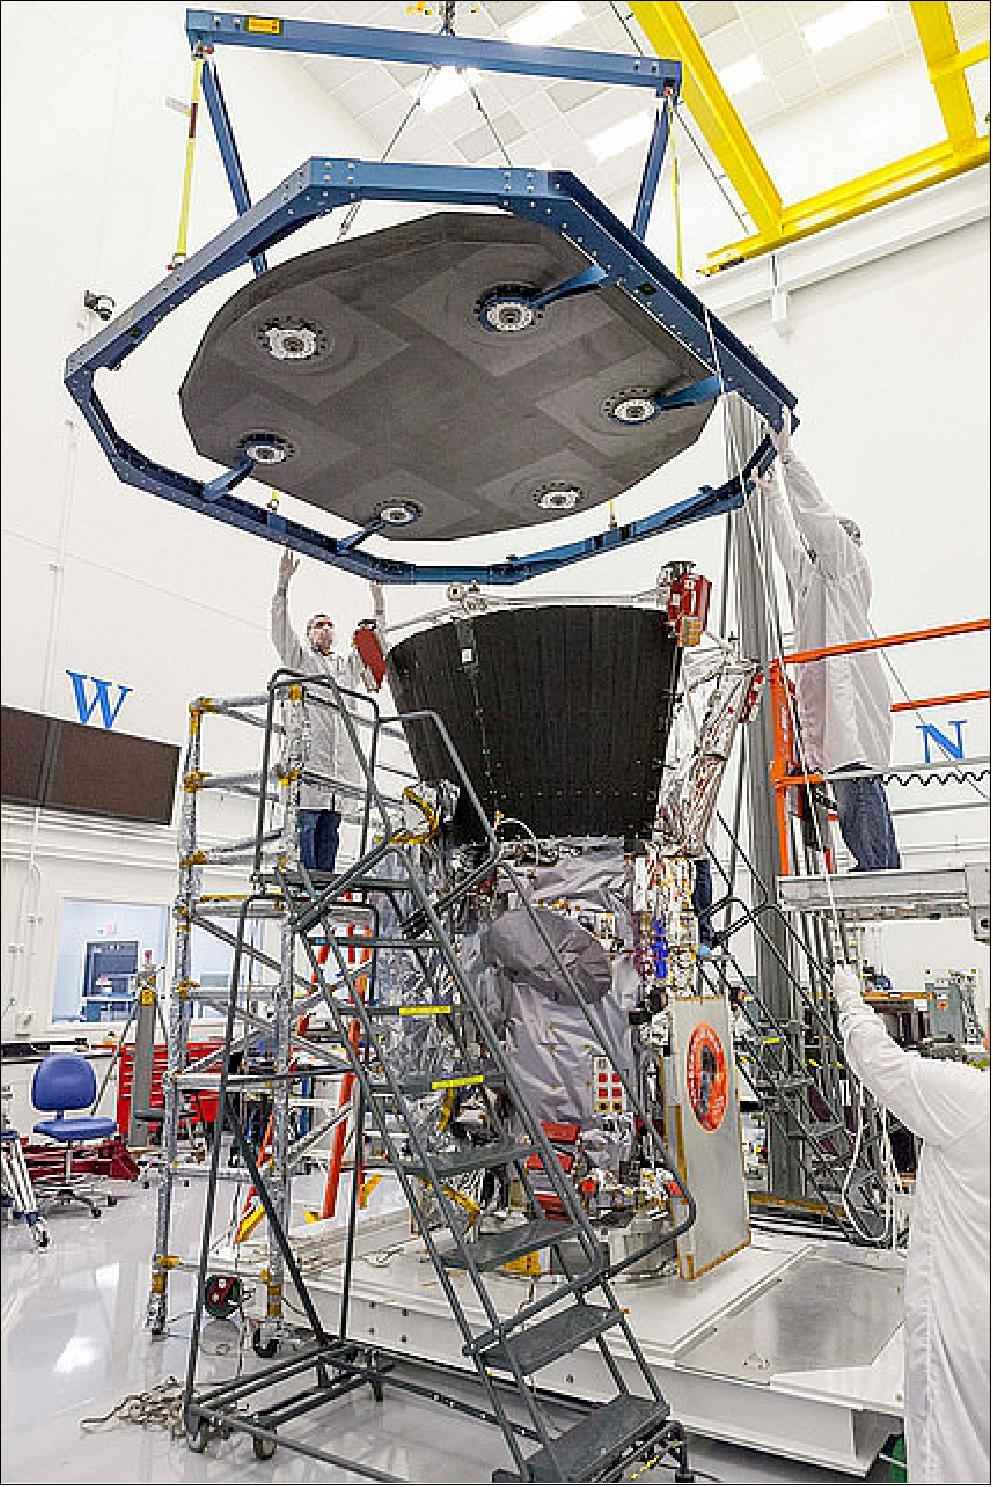 Figure 130: On 21 Sept. 2017, engineers at JHU/APL in Laurel, Maryland, lowered the thermal protection system – the heat shield – onto the spacecraft for a test of alignment as part of integration and testing (image credit: NASA/JHUAPL)